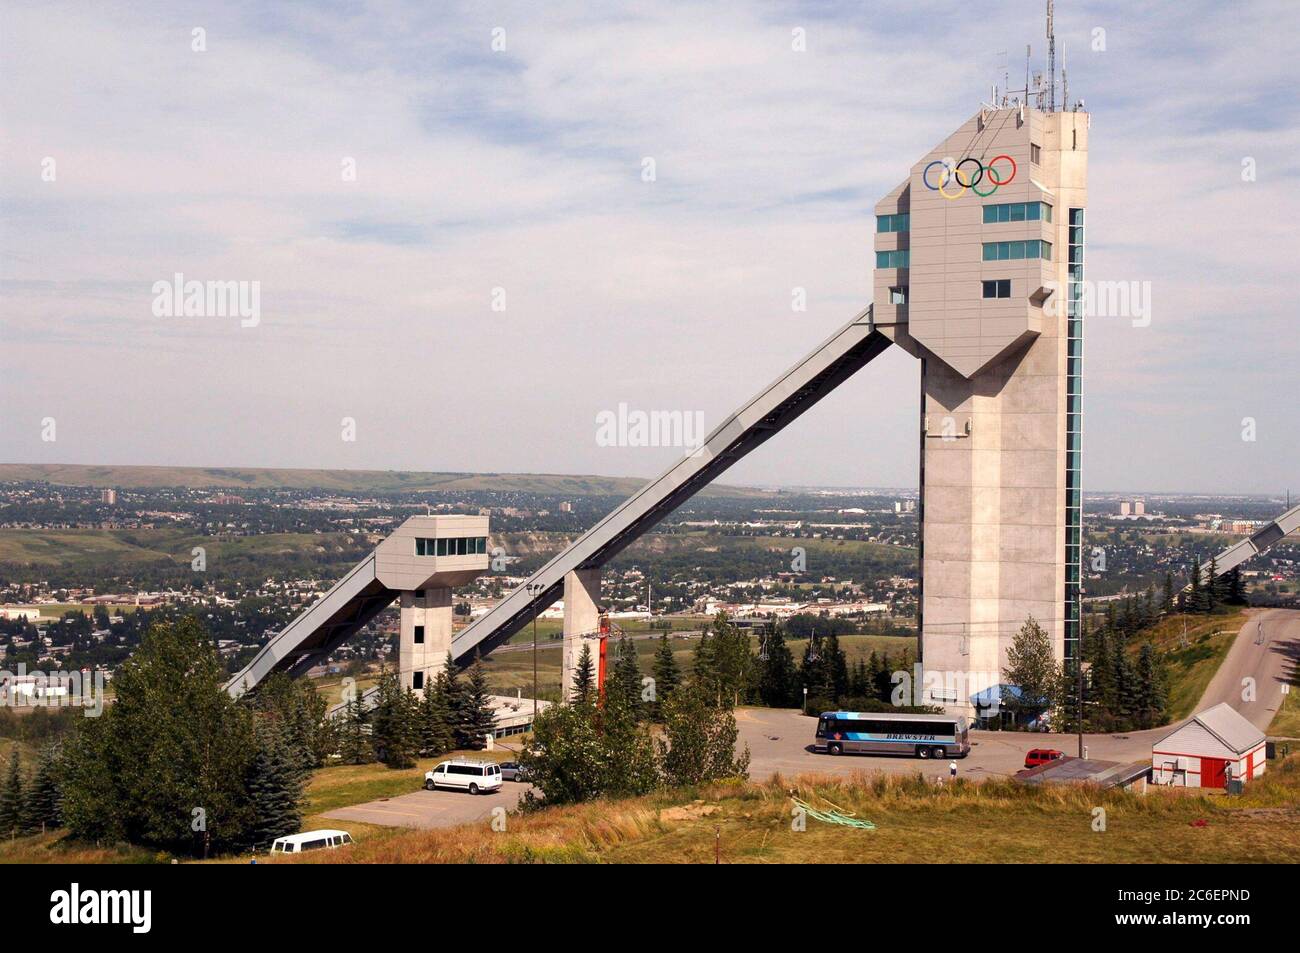 Calgary, Alberta CANADA July 27, 2005: The 90-meter ski jump platform at Canada Olympic Park in the summertime is a tourist landmark in Calgary. It was built for the 1988 Winter Olympics. ©Bob Daemmrich Stock Photo